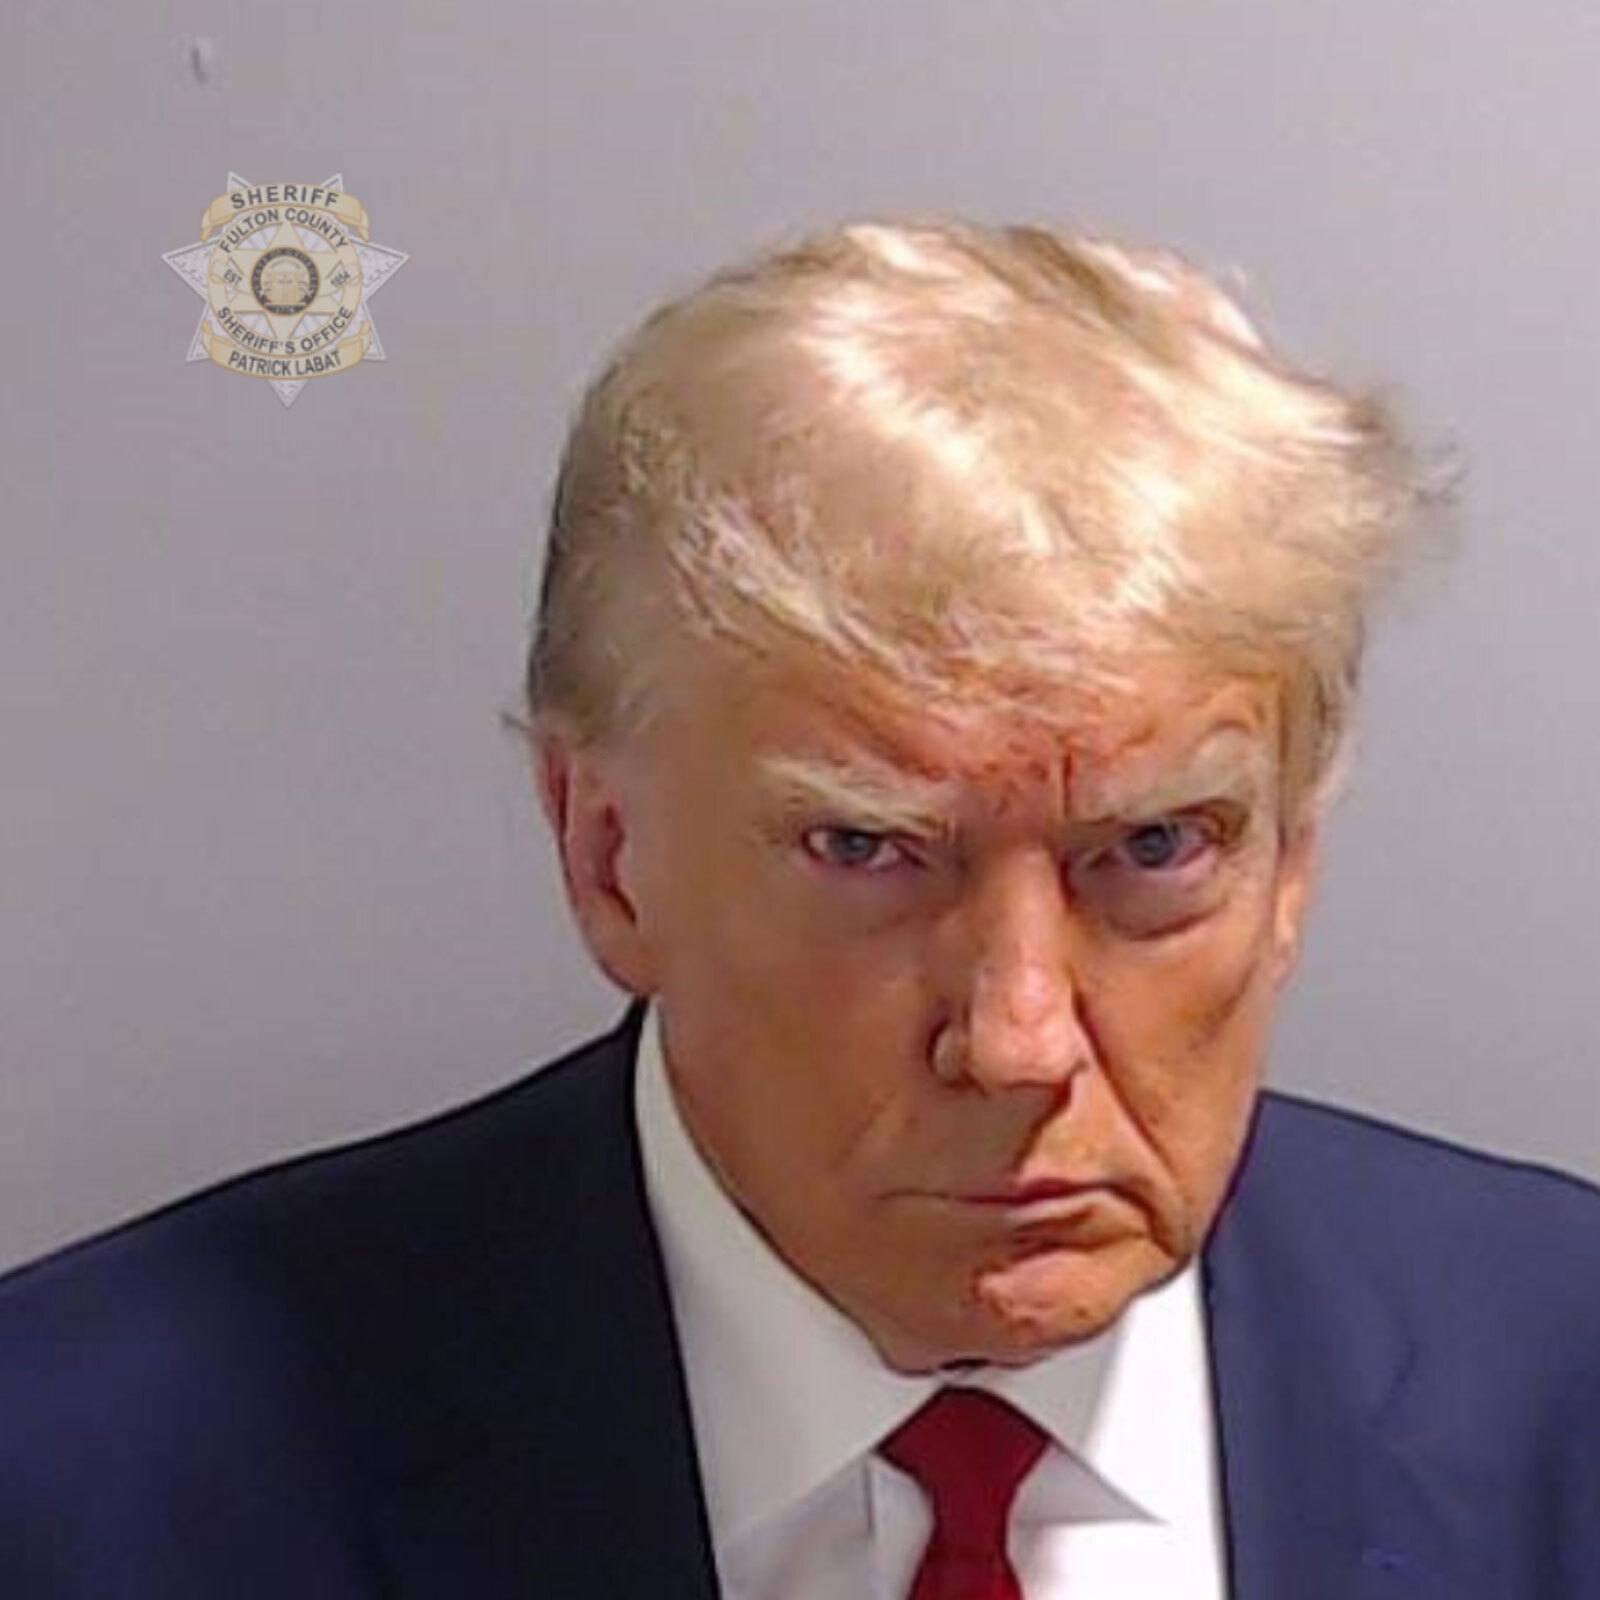 Lock Him Up! Donald Trump Scowls For Mugshot During RICO Surrender, Rants About Rigged Election